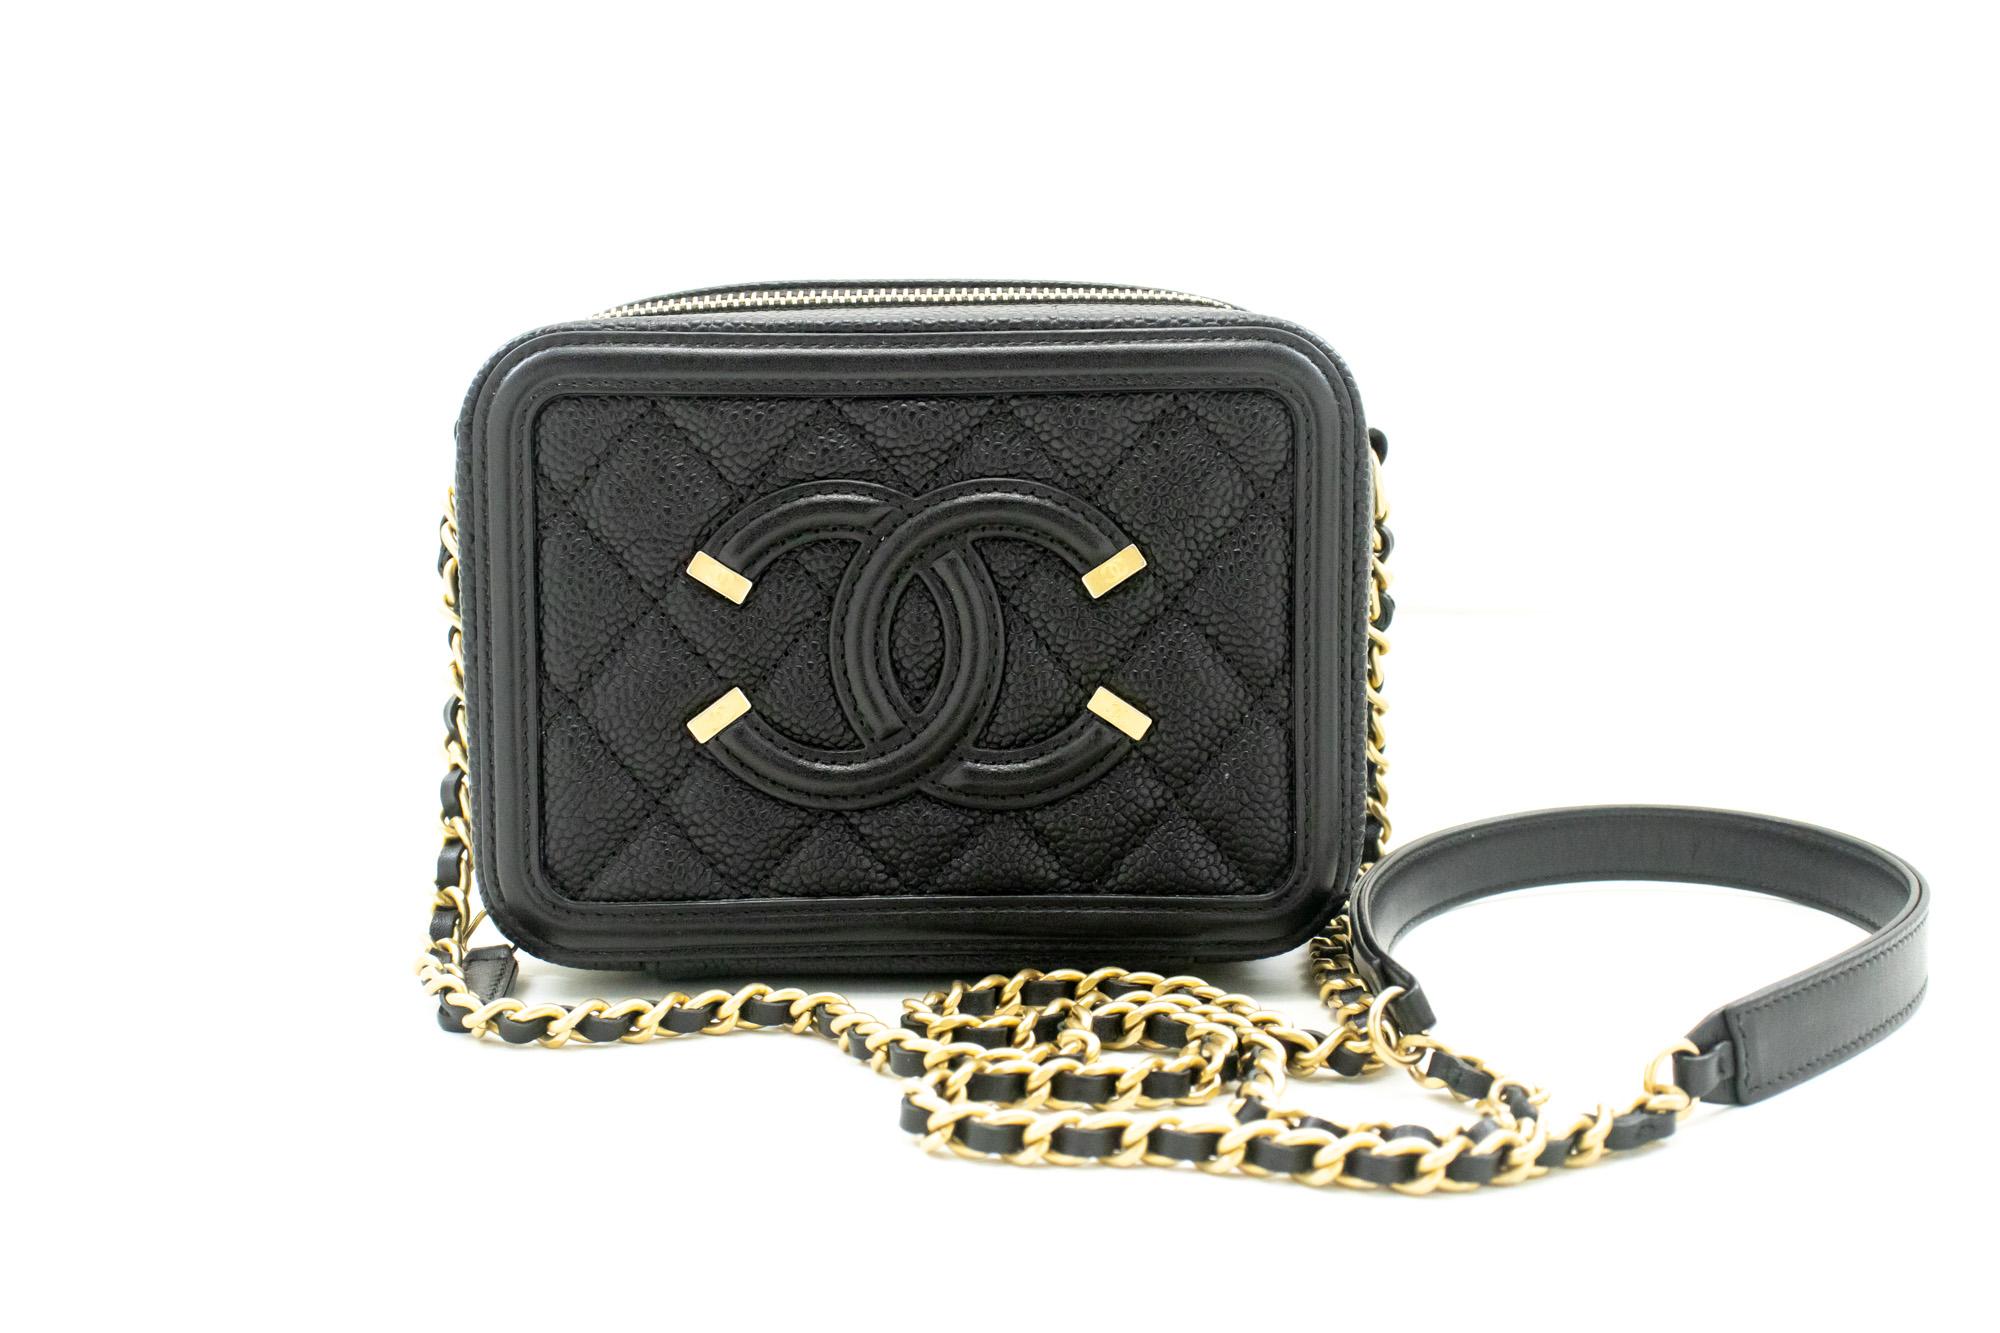 An authentic CHANEL Micro Caviar Grained Calfskin Chain Shoulder Bag Black Zip. The color is Black. The outside material is Leather. The pattern is Solid. This item is Contemporary. The year of manufacture would be 2017.
Conditions & Ratings
Outside